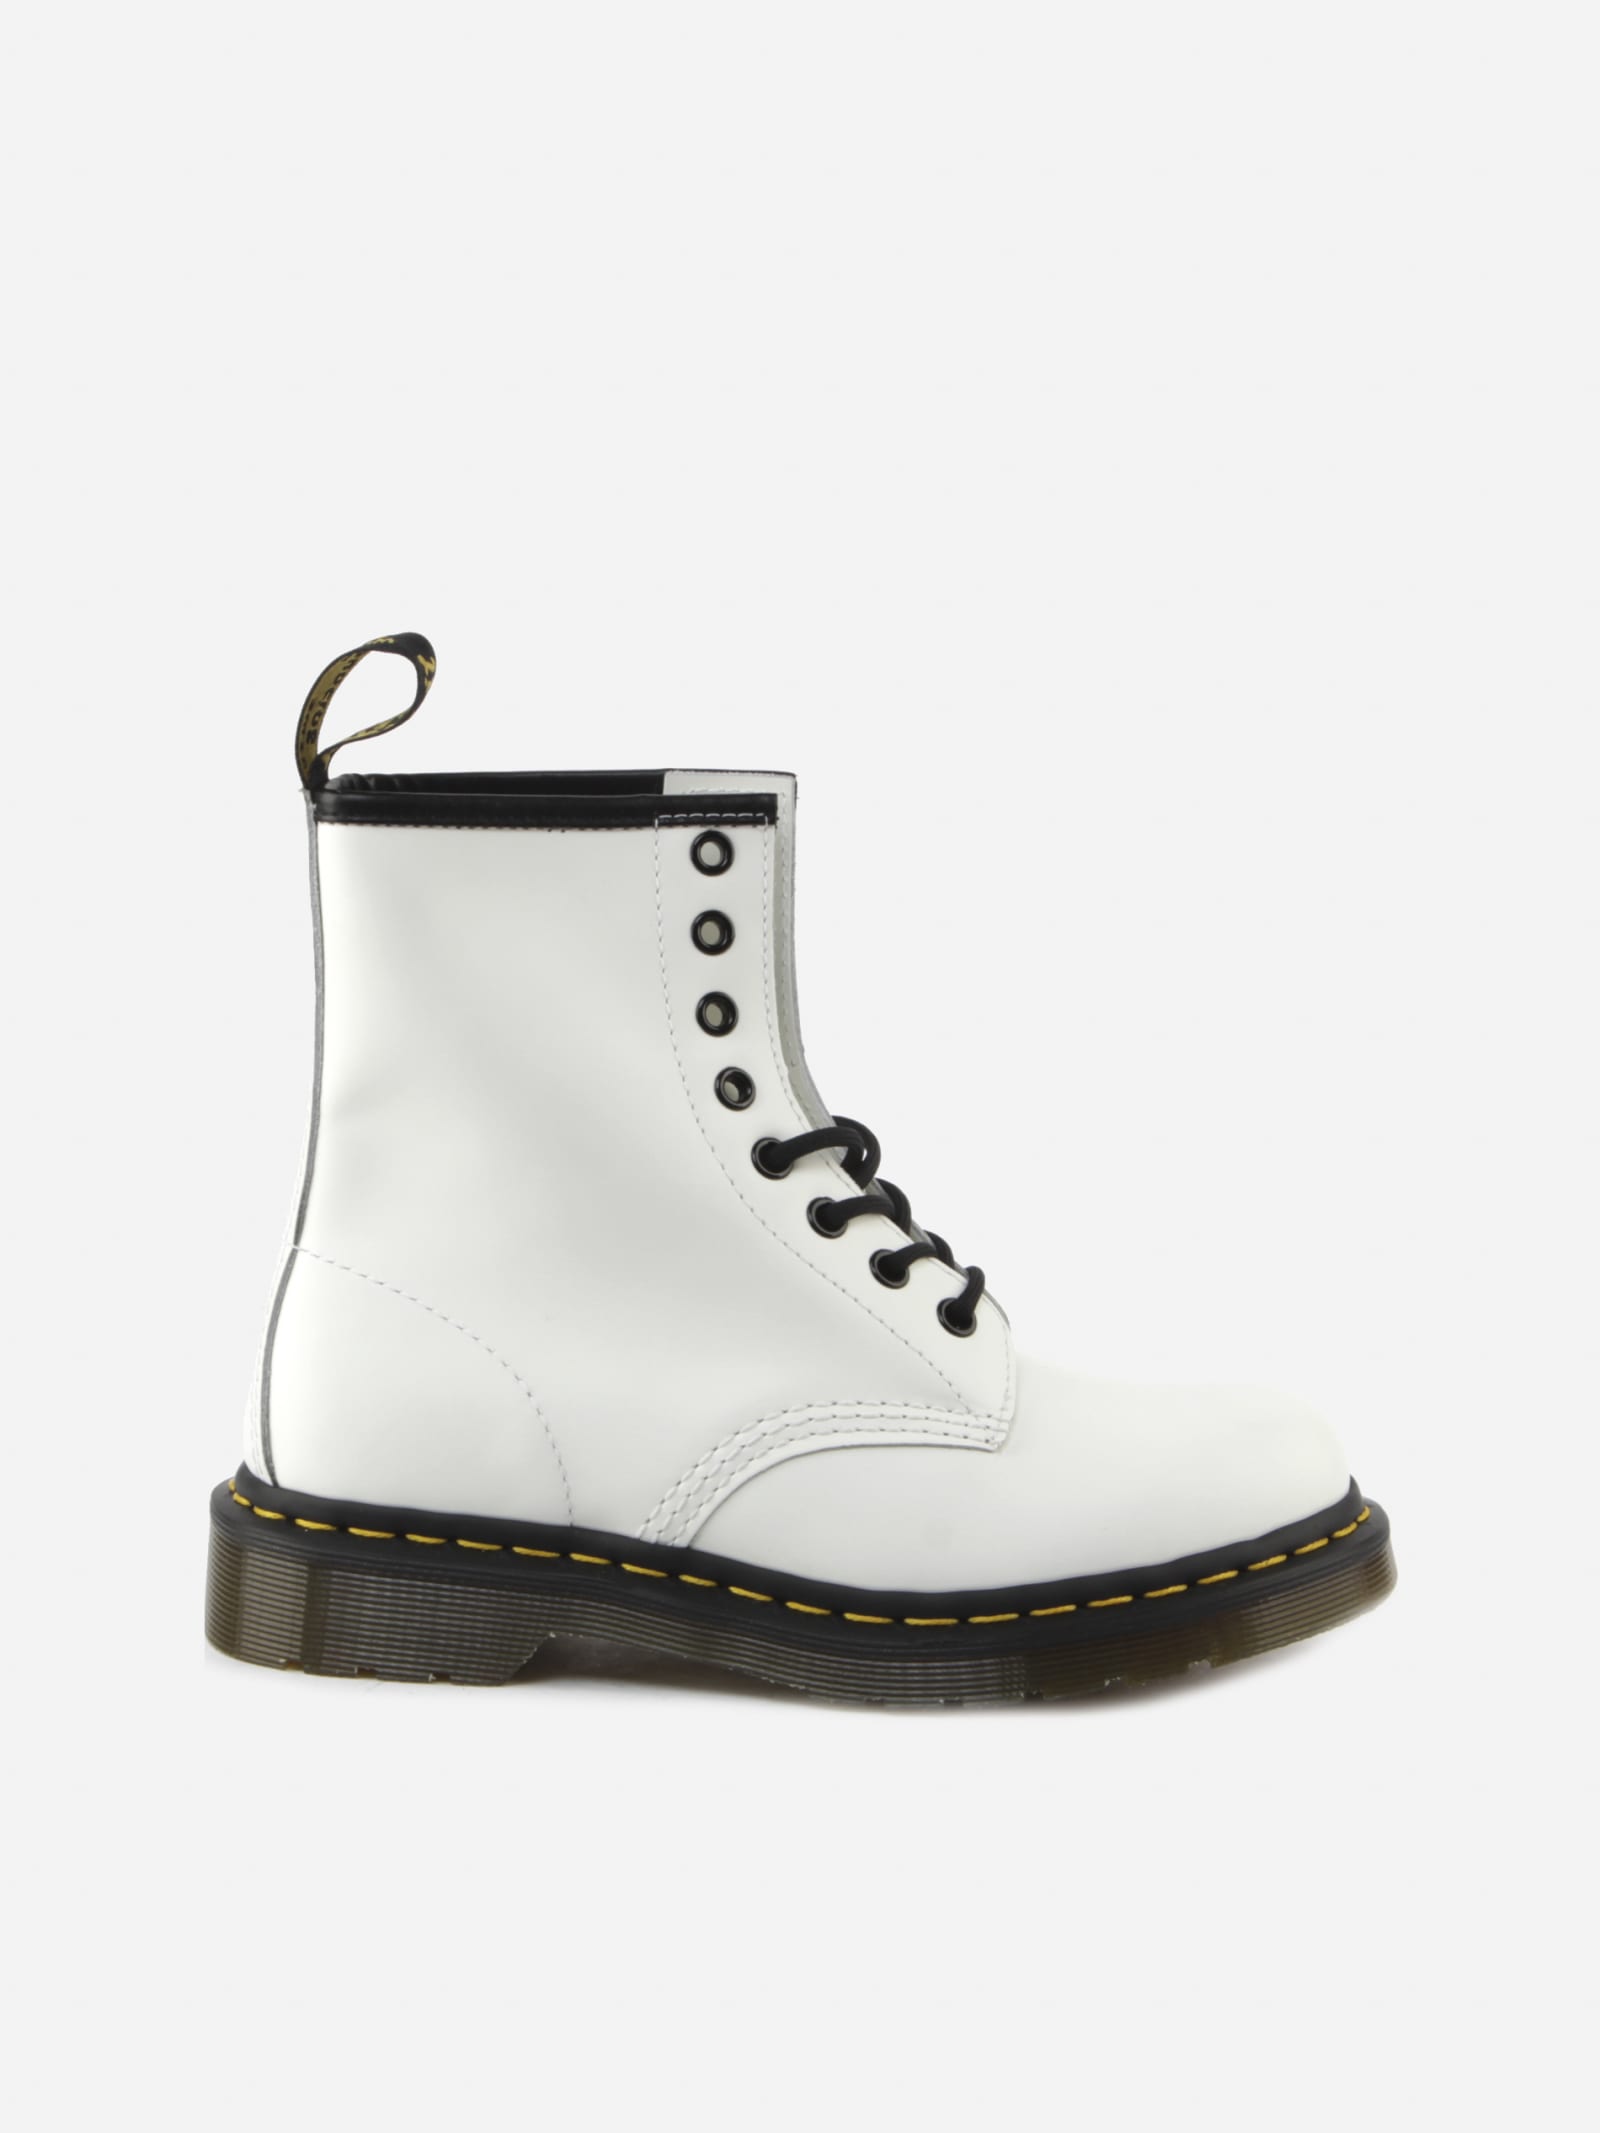 Buy Dr. Martens 1460 Combat Boots In Smooth Leather With Contrasting Stitching online, shop Dr. Martens shoes with free shipping